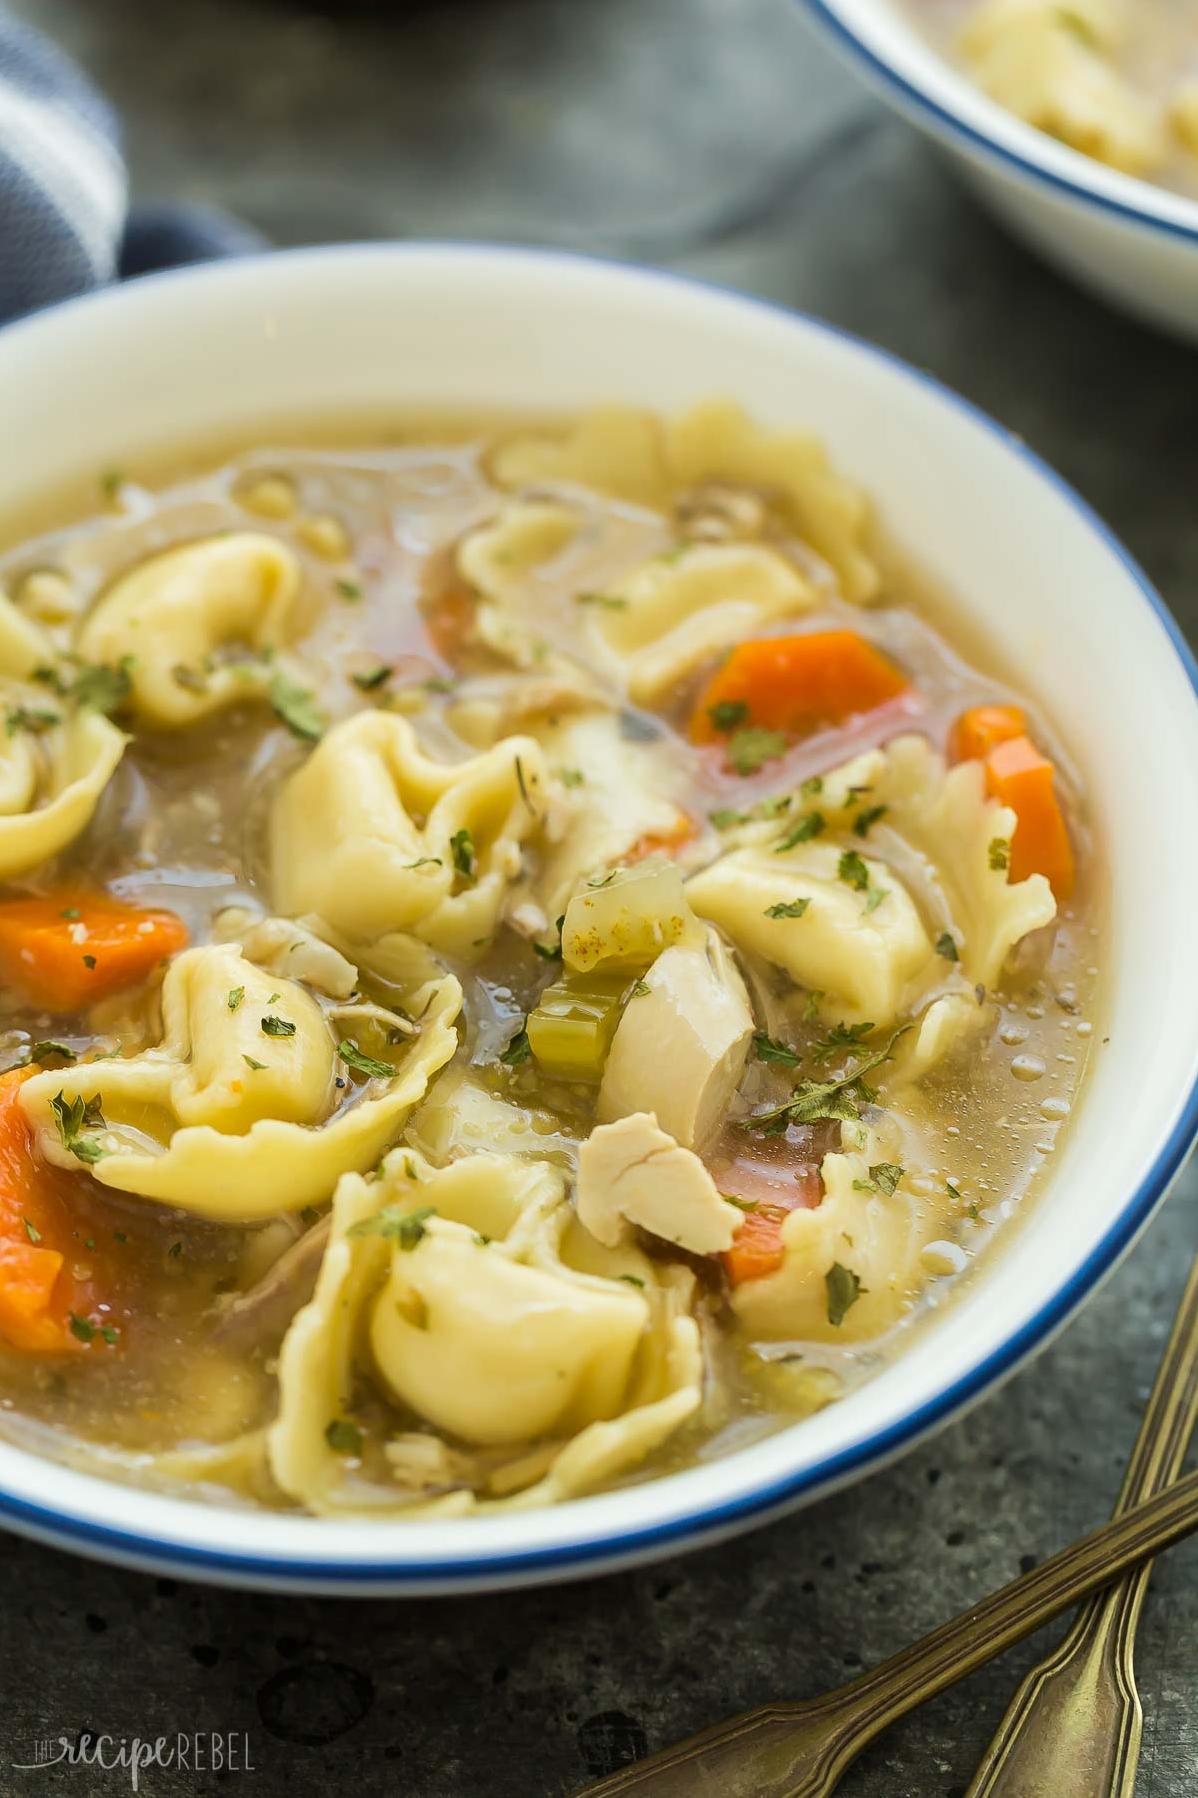  A big bowl of this soup will make your taste buds dance with joy.